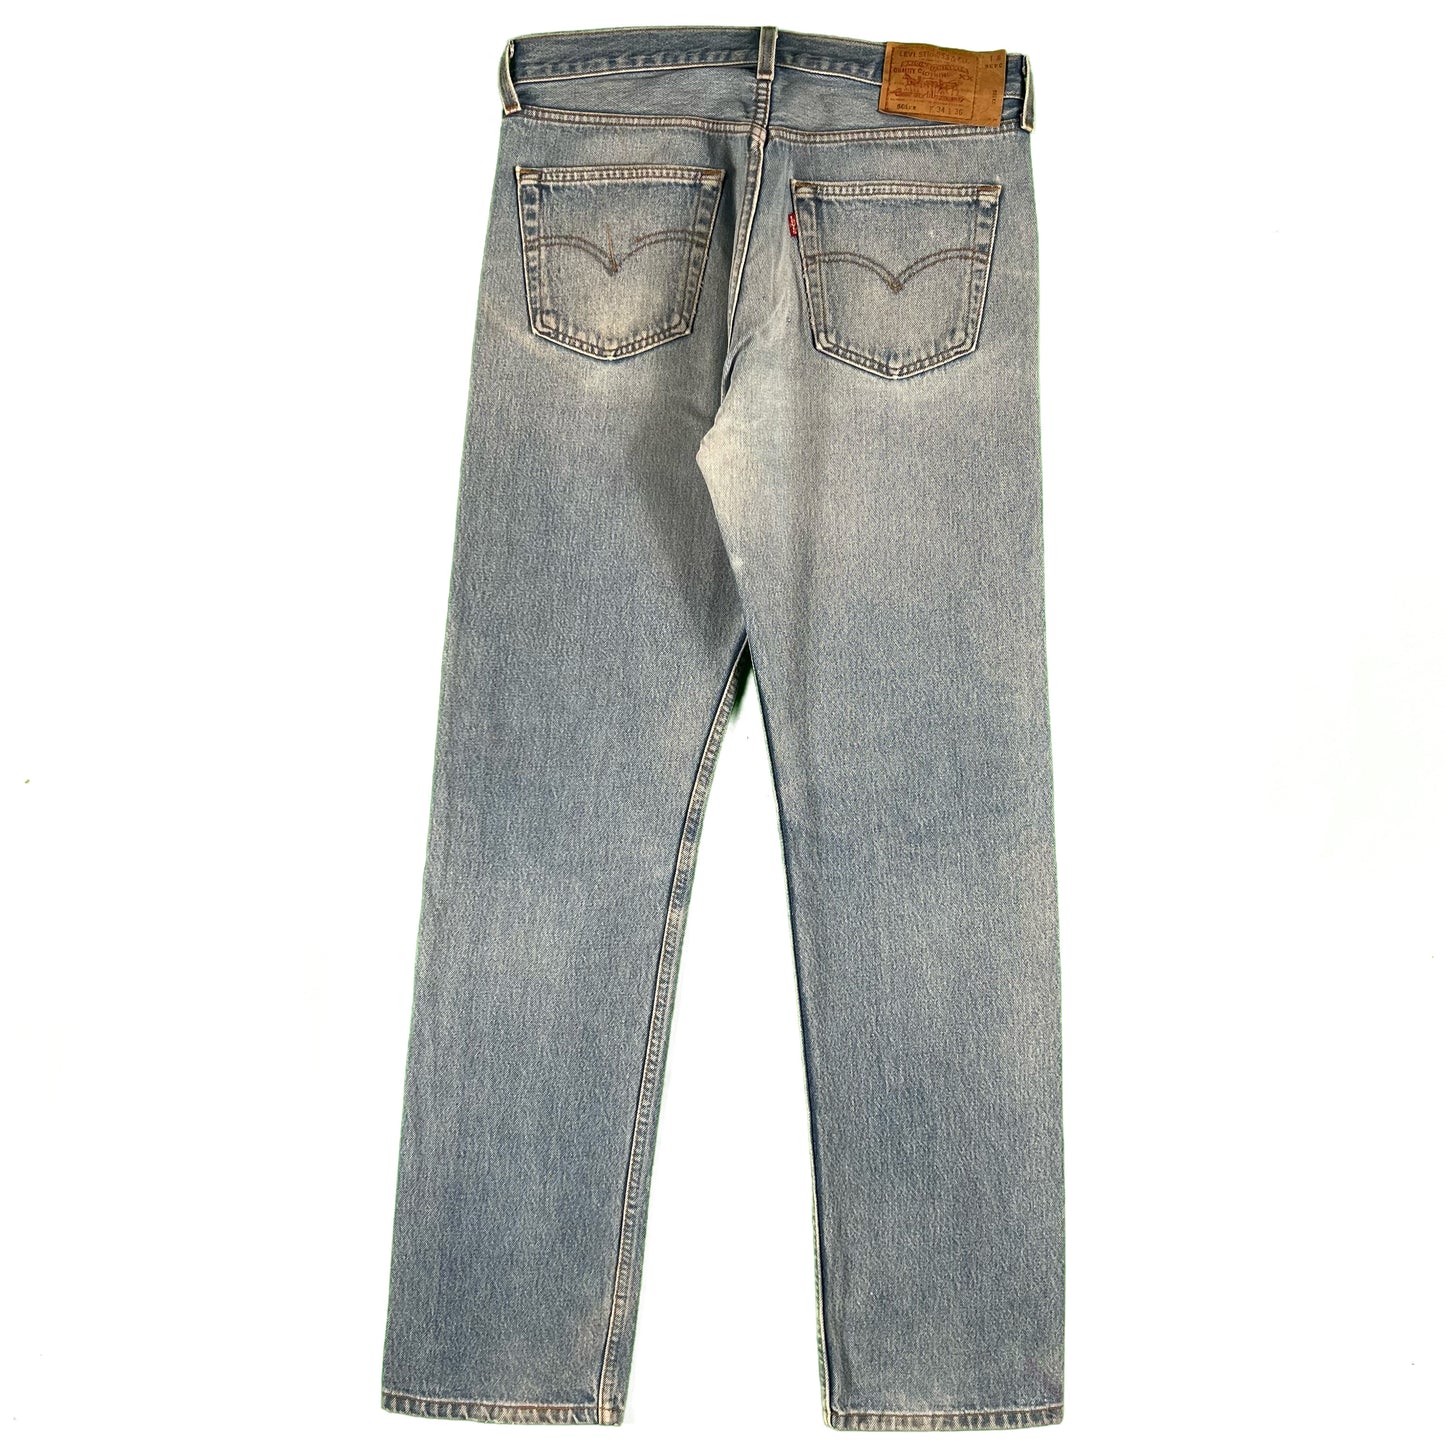 90s Levi's 501 2 Pack-(34x33)